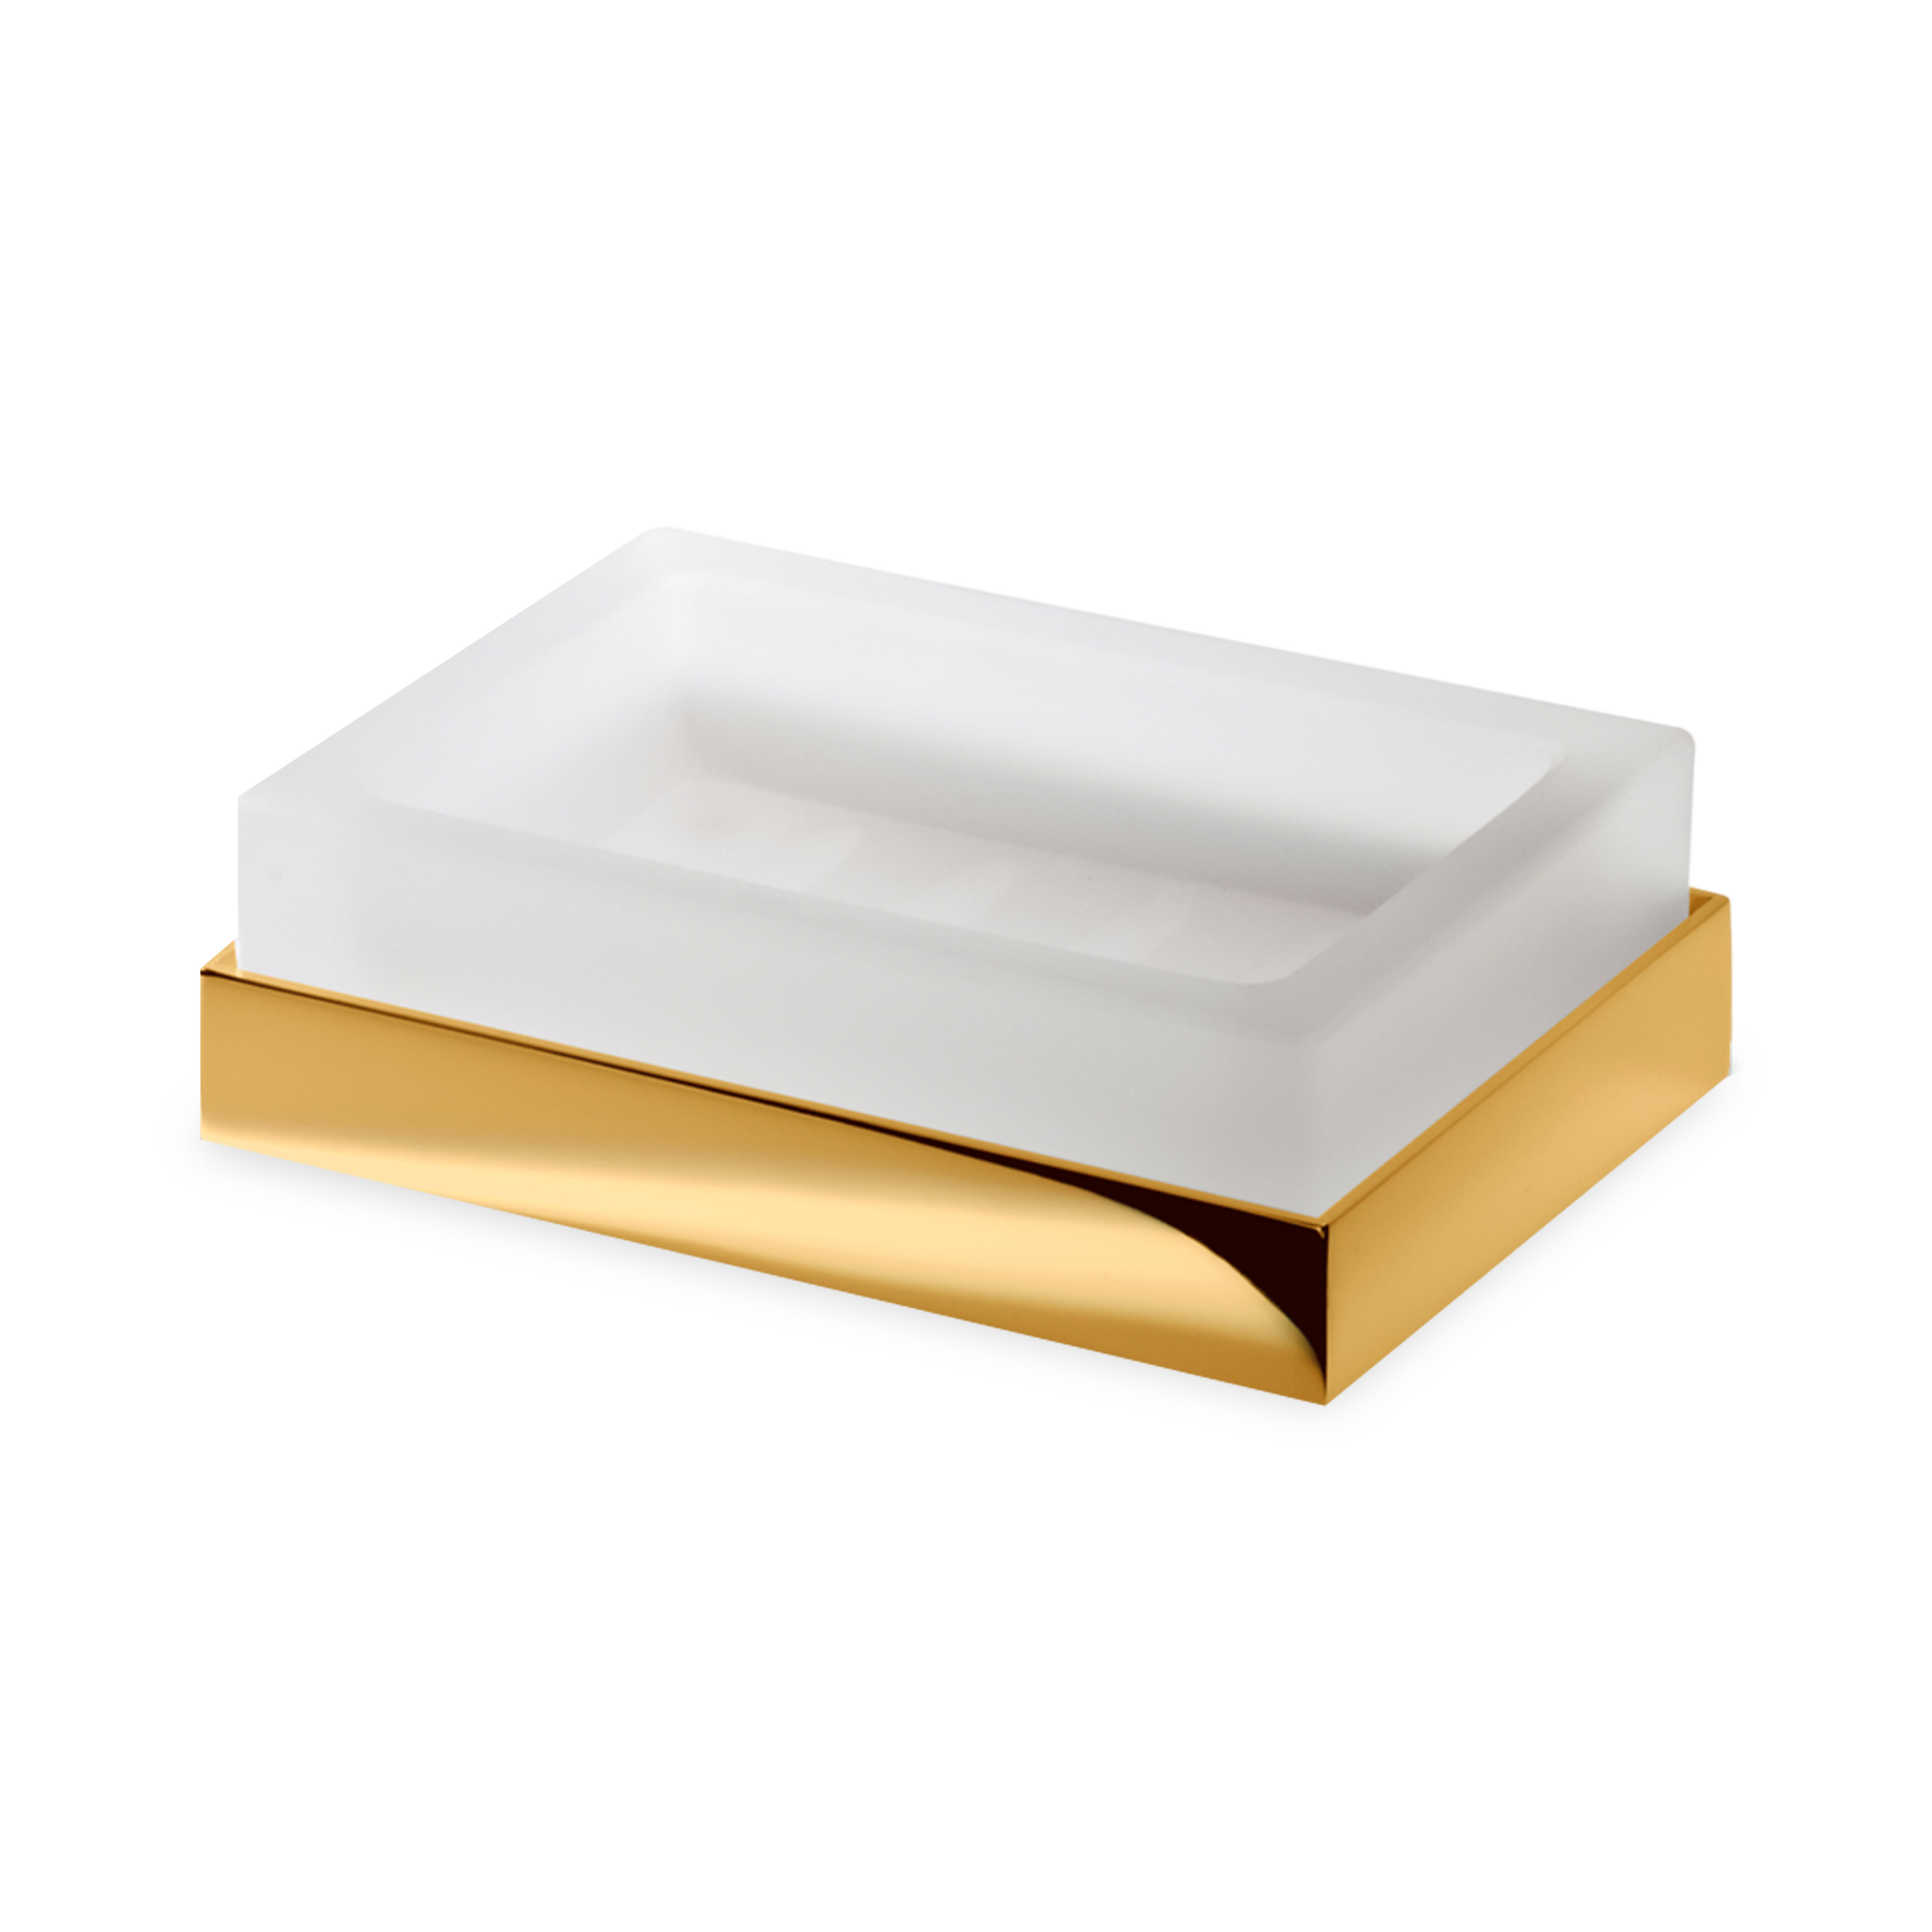 Elegant soap dish with a classic modern styling, crafted in satin glass with a gold accent.